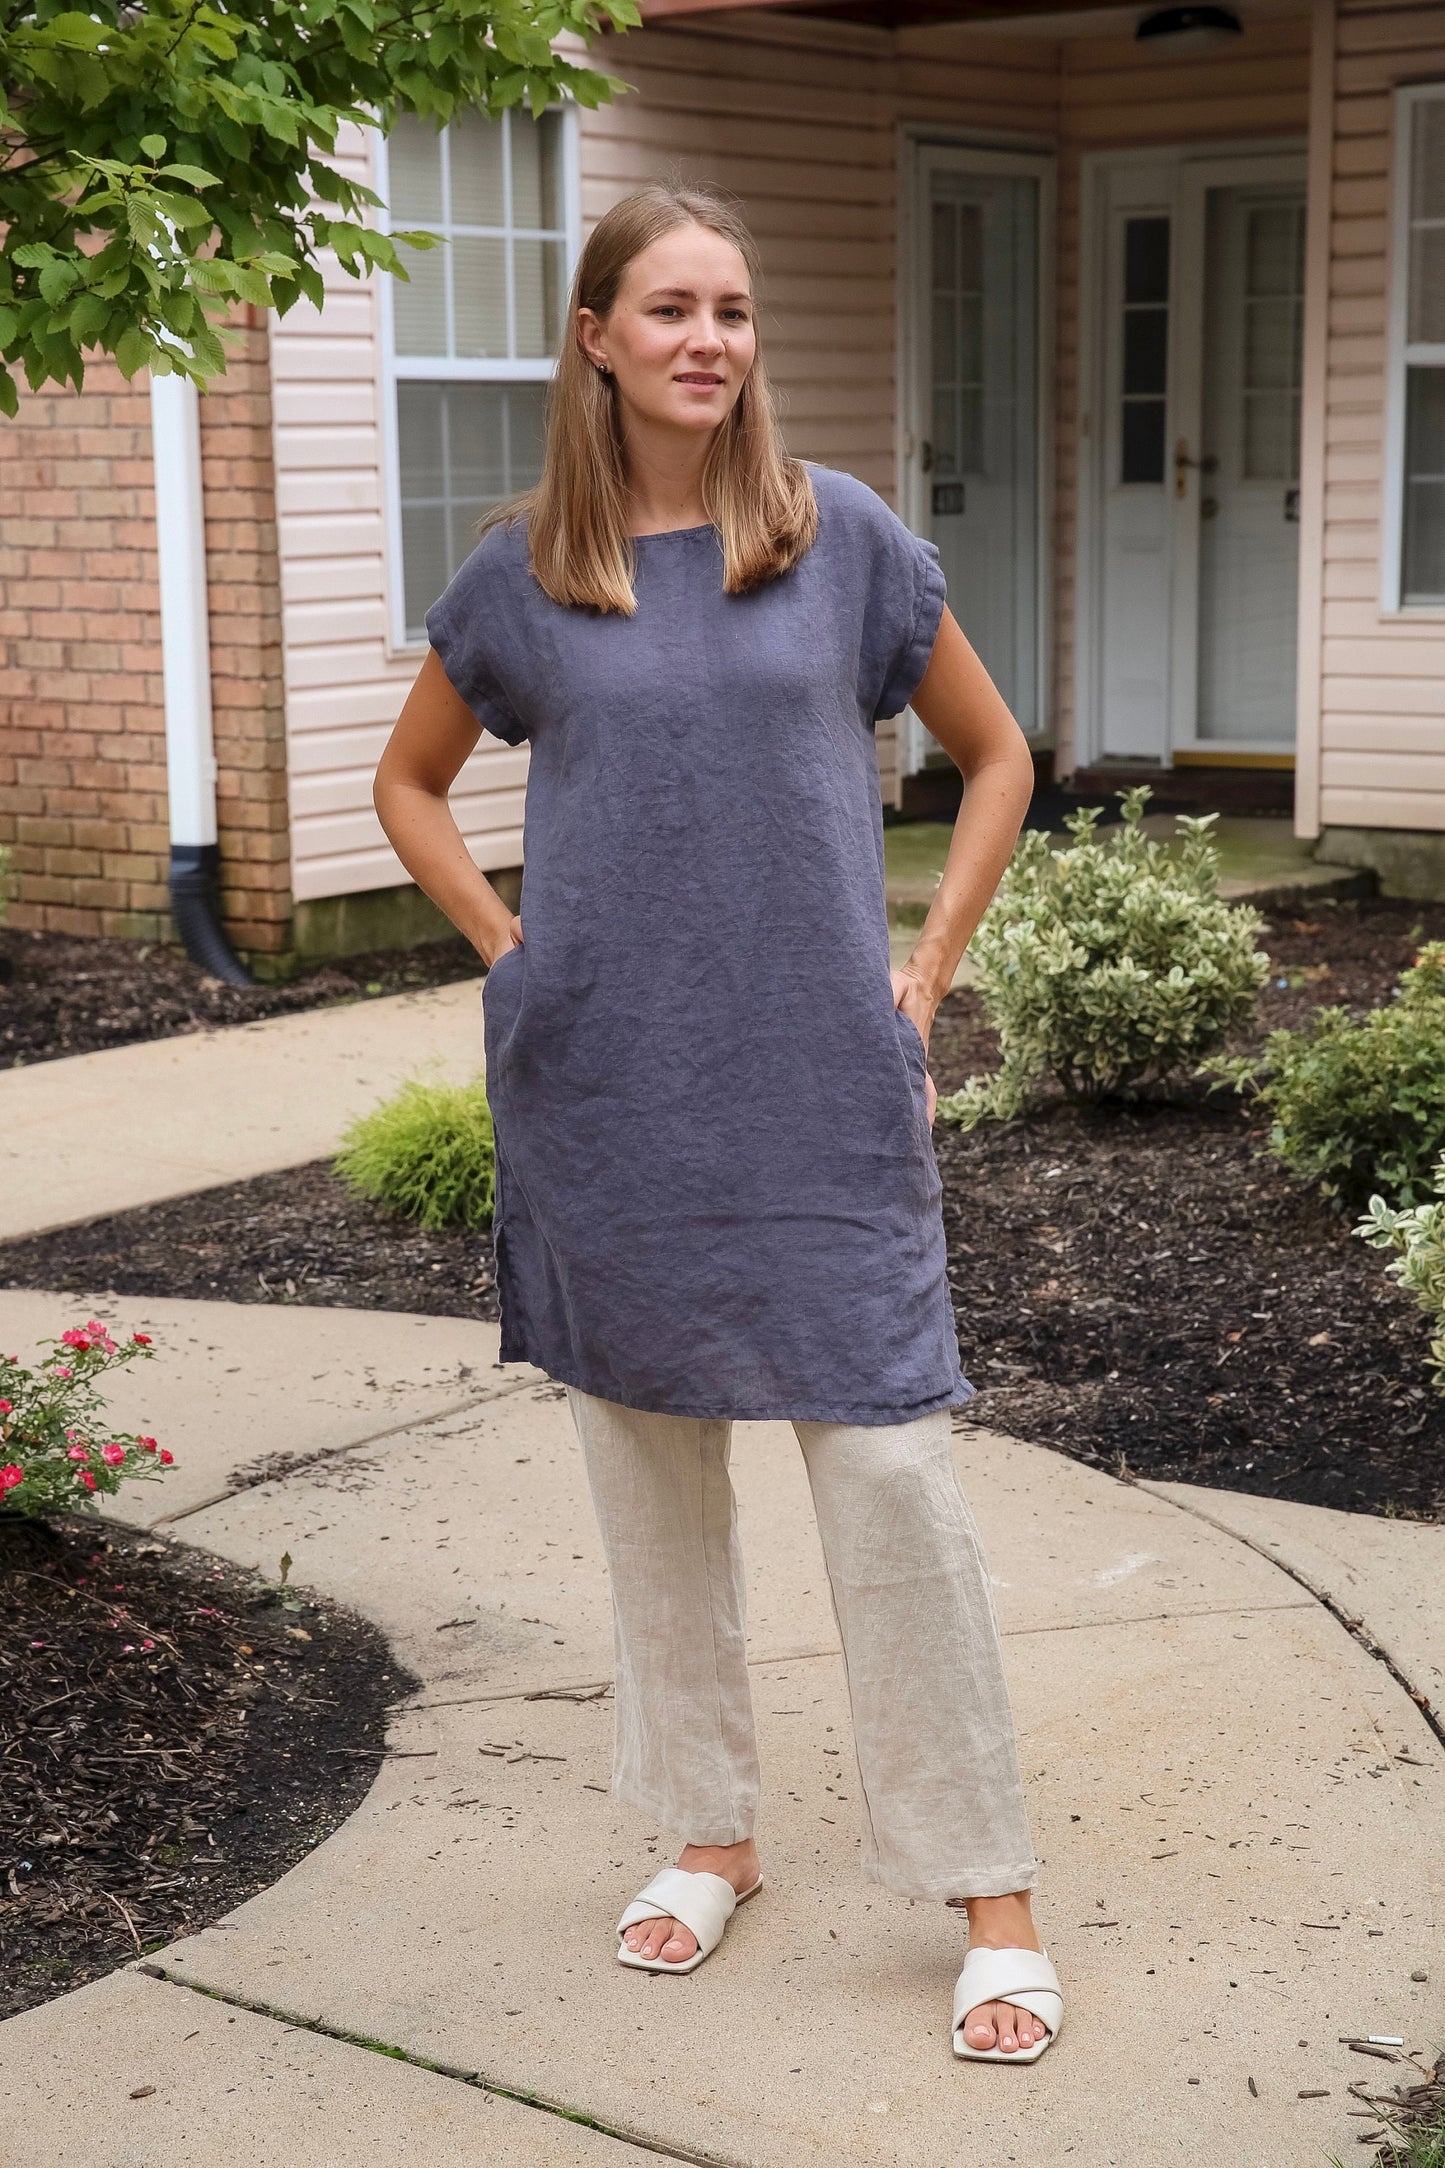 Tanya Linen Summer Dress in Relaxed Tunic Style, Perfect for Casual Summer Elegance